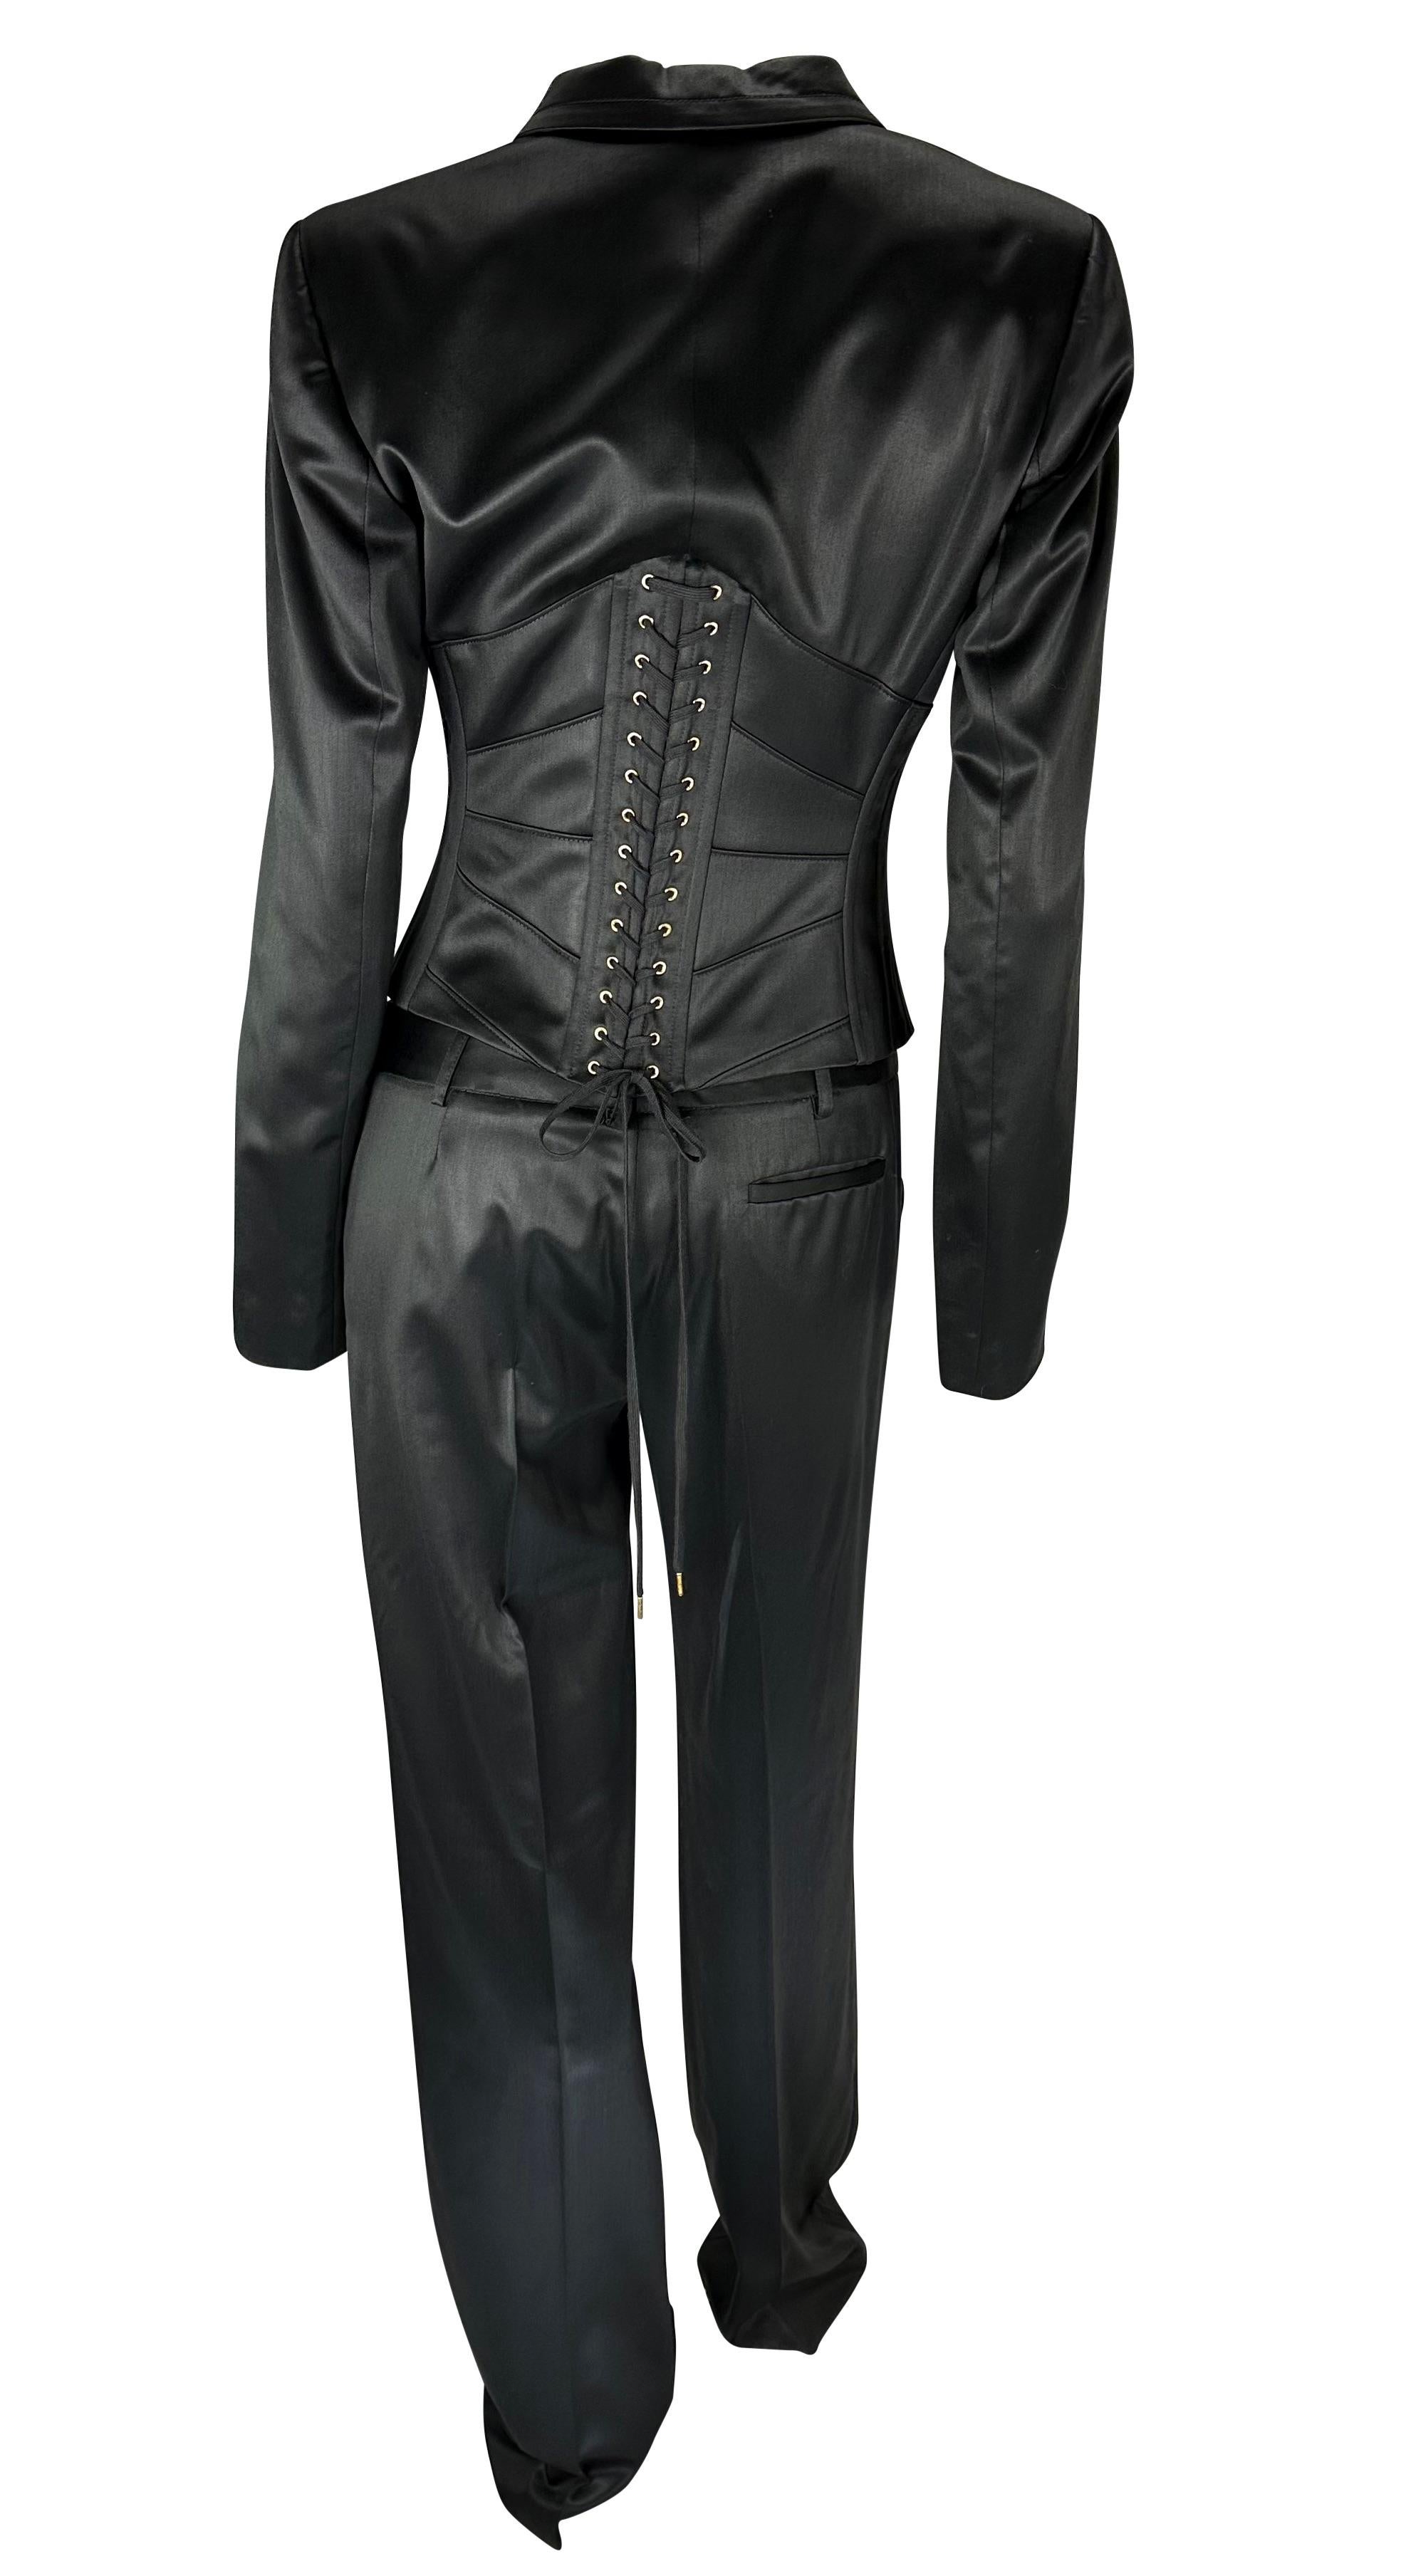 F/W 2004 Roberto Cavalli Corset Boned Lace-Up Black Low-Rise Pantsuit In Excellent Condition For Sale In West Hollywood, CA